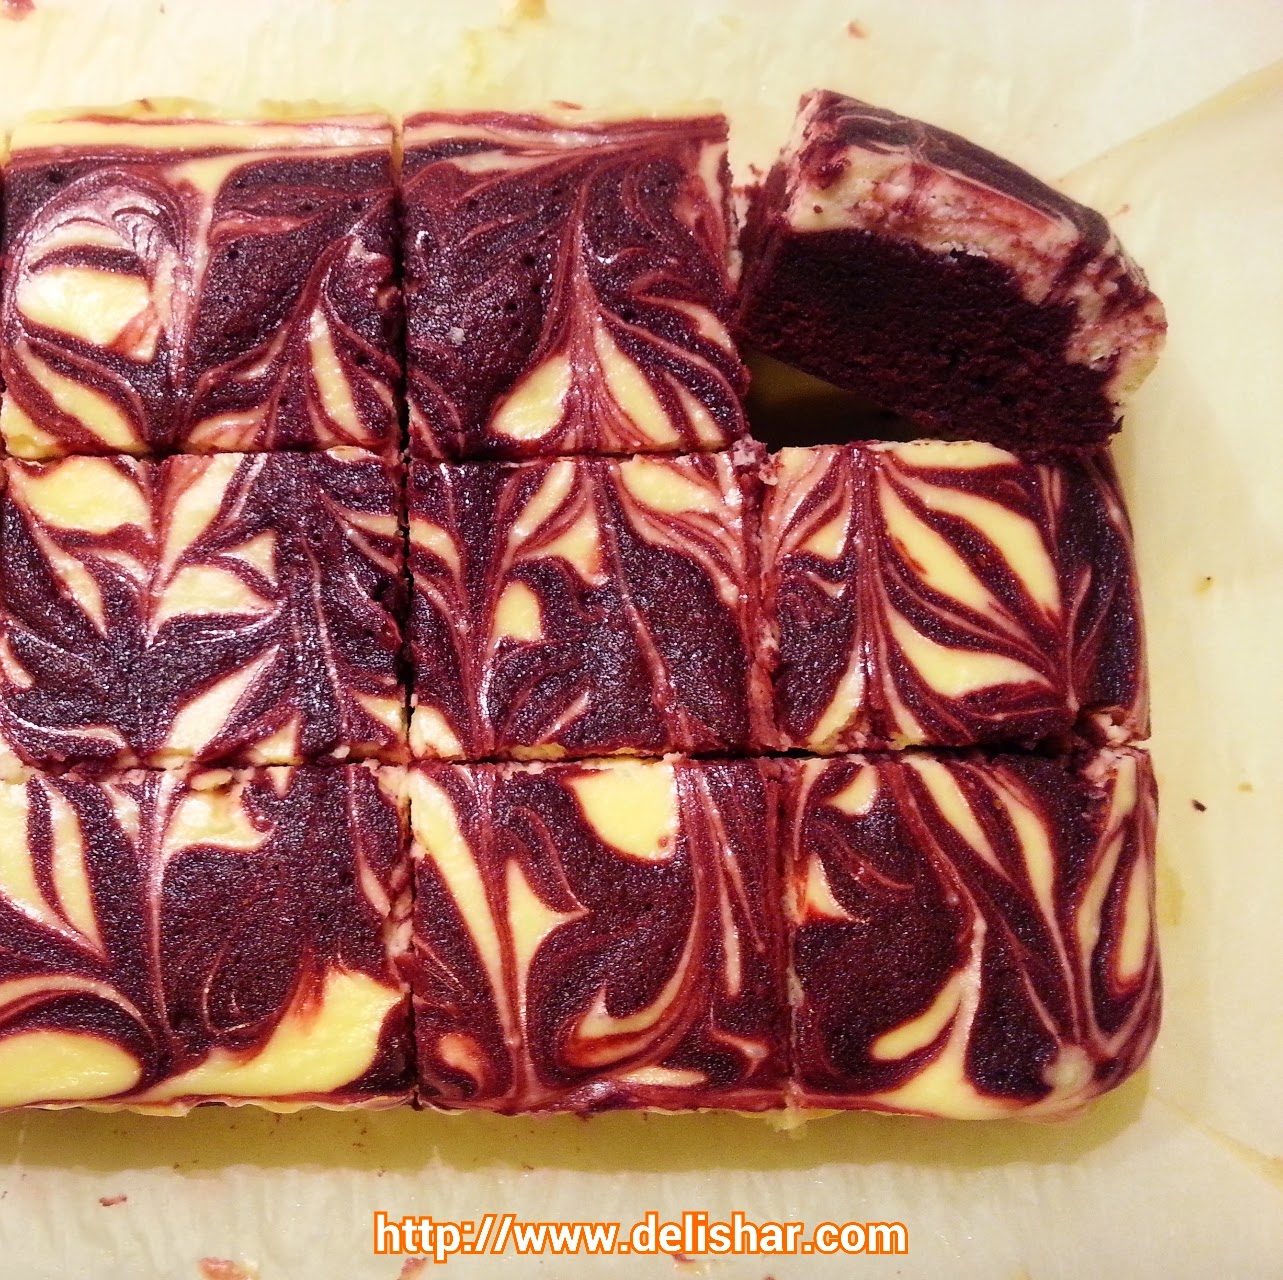 Velvet Brownies - | Singapore Cooking, Recipe, and Lifestyle Blog